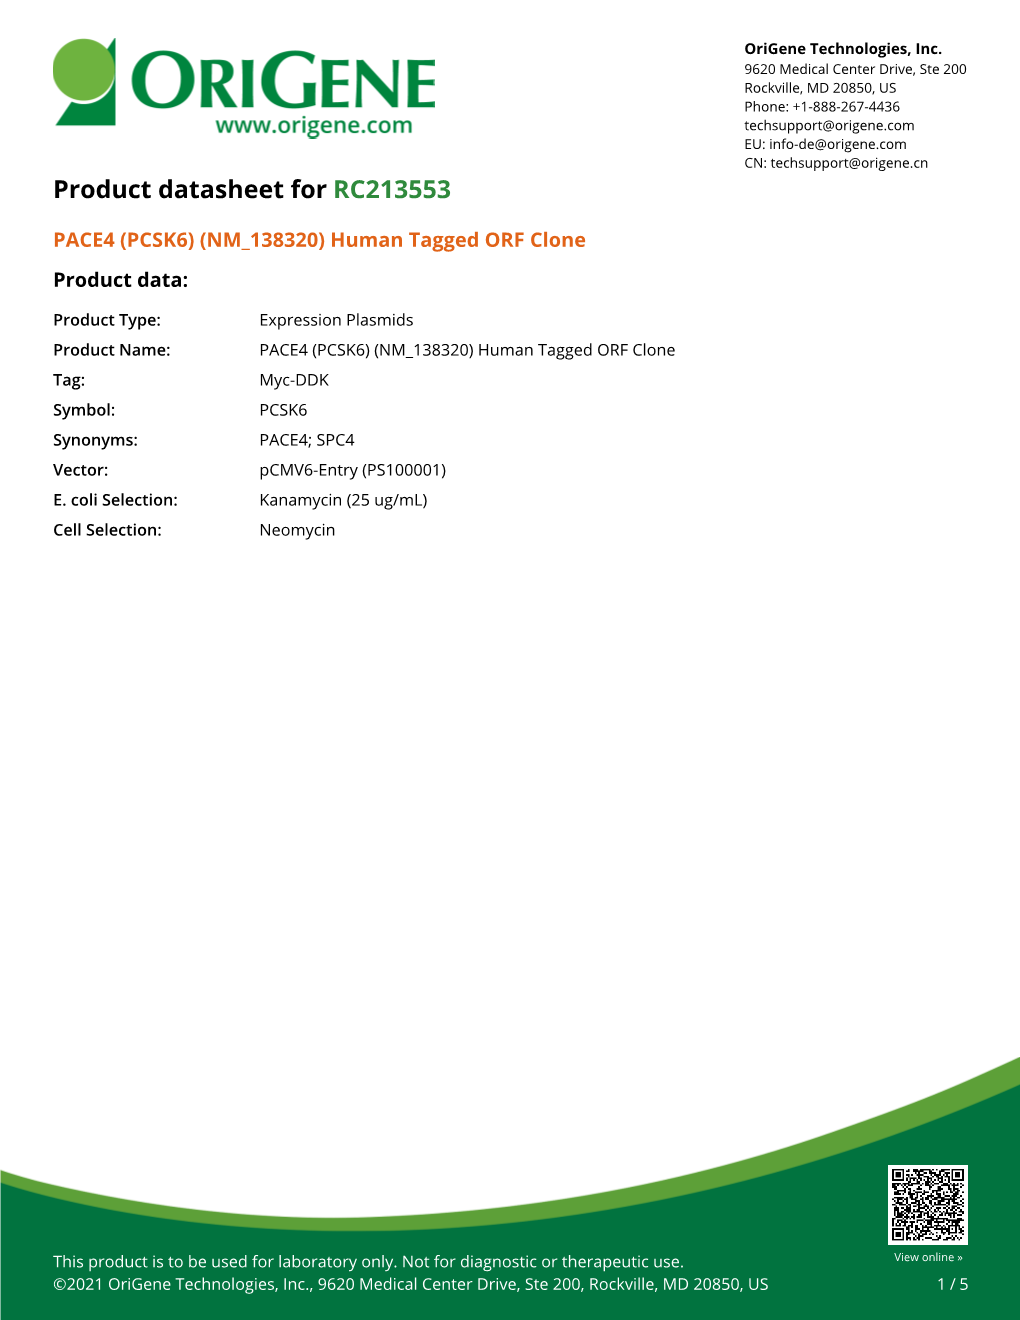 PACE4 (PCSK6) (NM 138320) Human Tagged ORF Clone Product Data